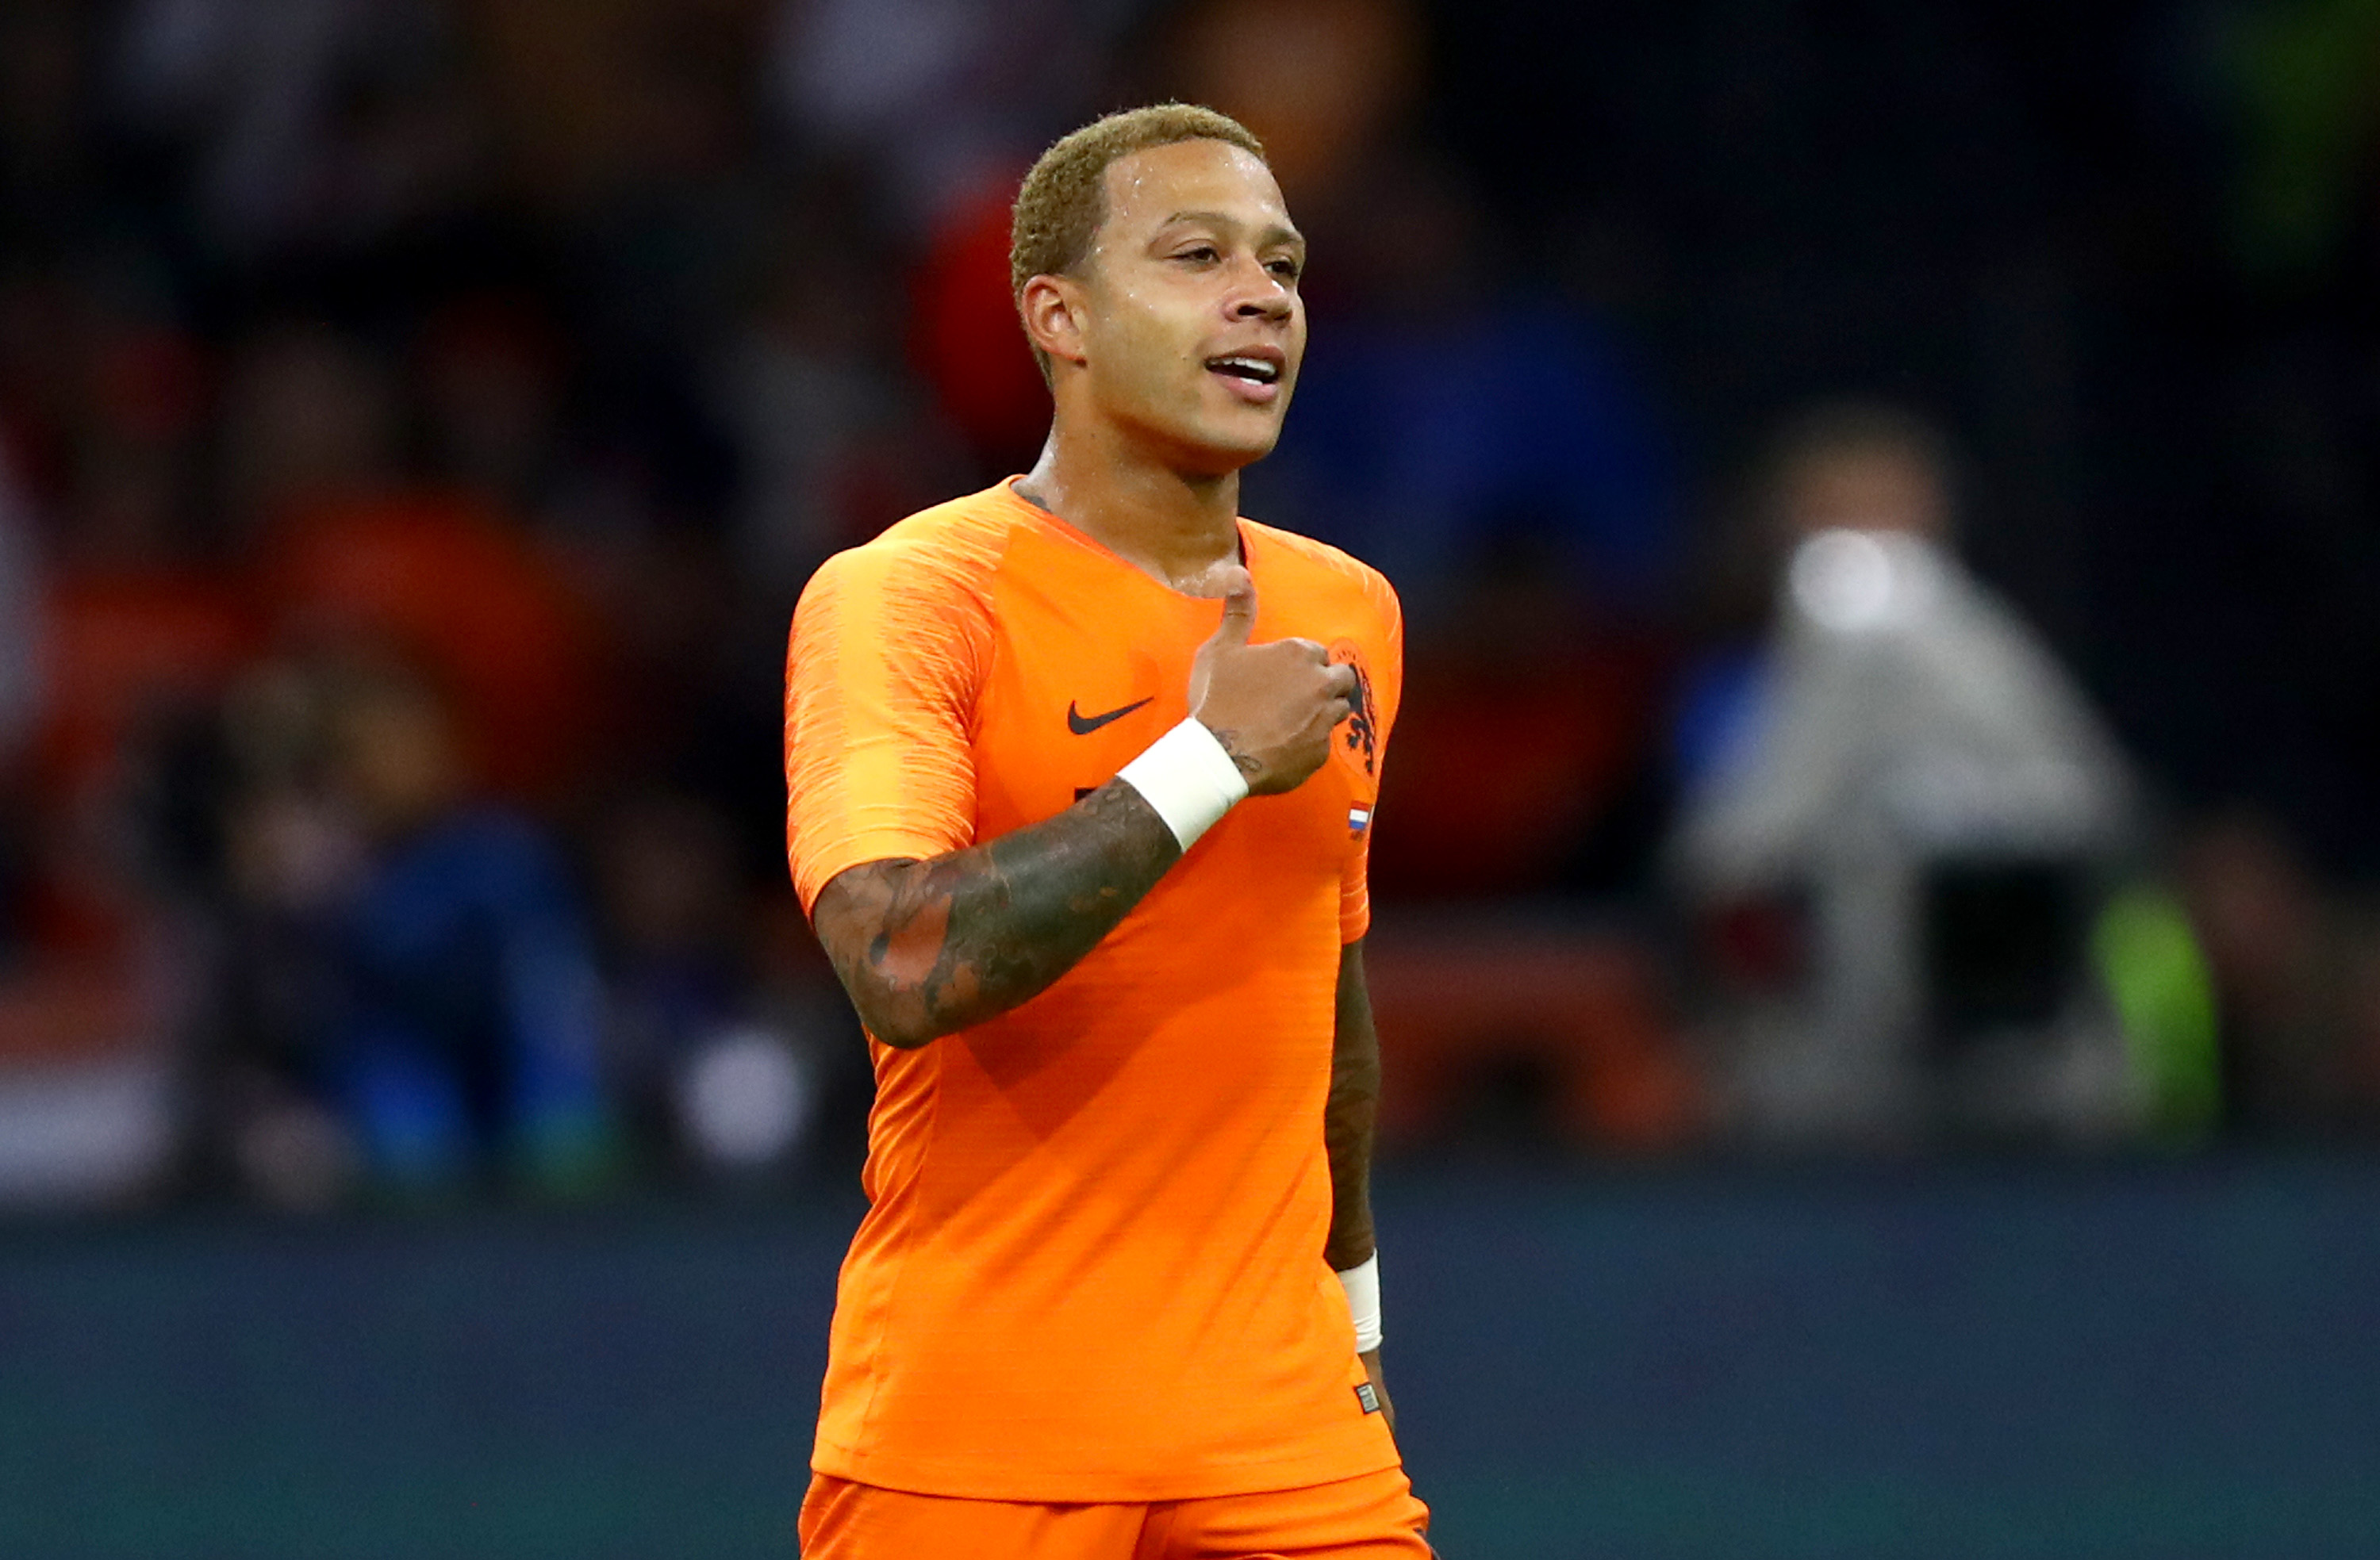 AMSTERDAM, NETHERLANDS - SEPTEMBER 06:  Memphis Depay of the Netherlands celebrates after scoring his team's first goal during the International Friendly match between Netherlands and Peru at Johan Cruyff Arena on September 6, 2018 in Amsterdam, Netherlands.  (Photo by Dean Mouhtaropoulos/Getty Images)